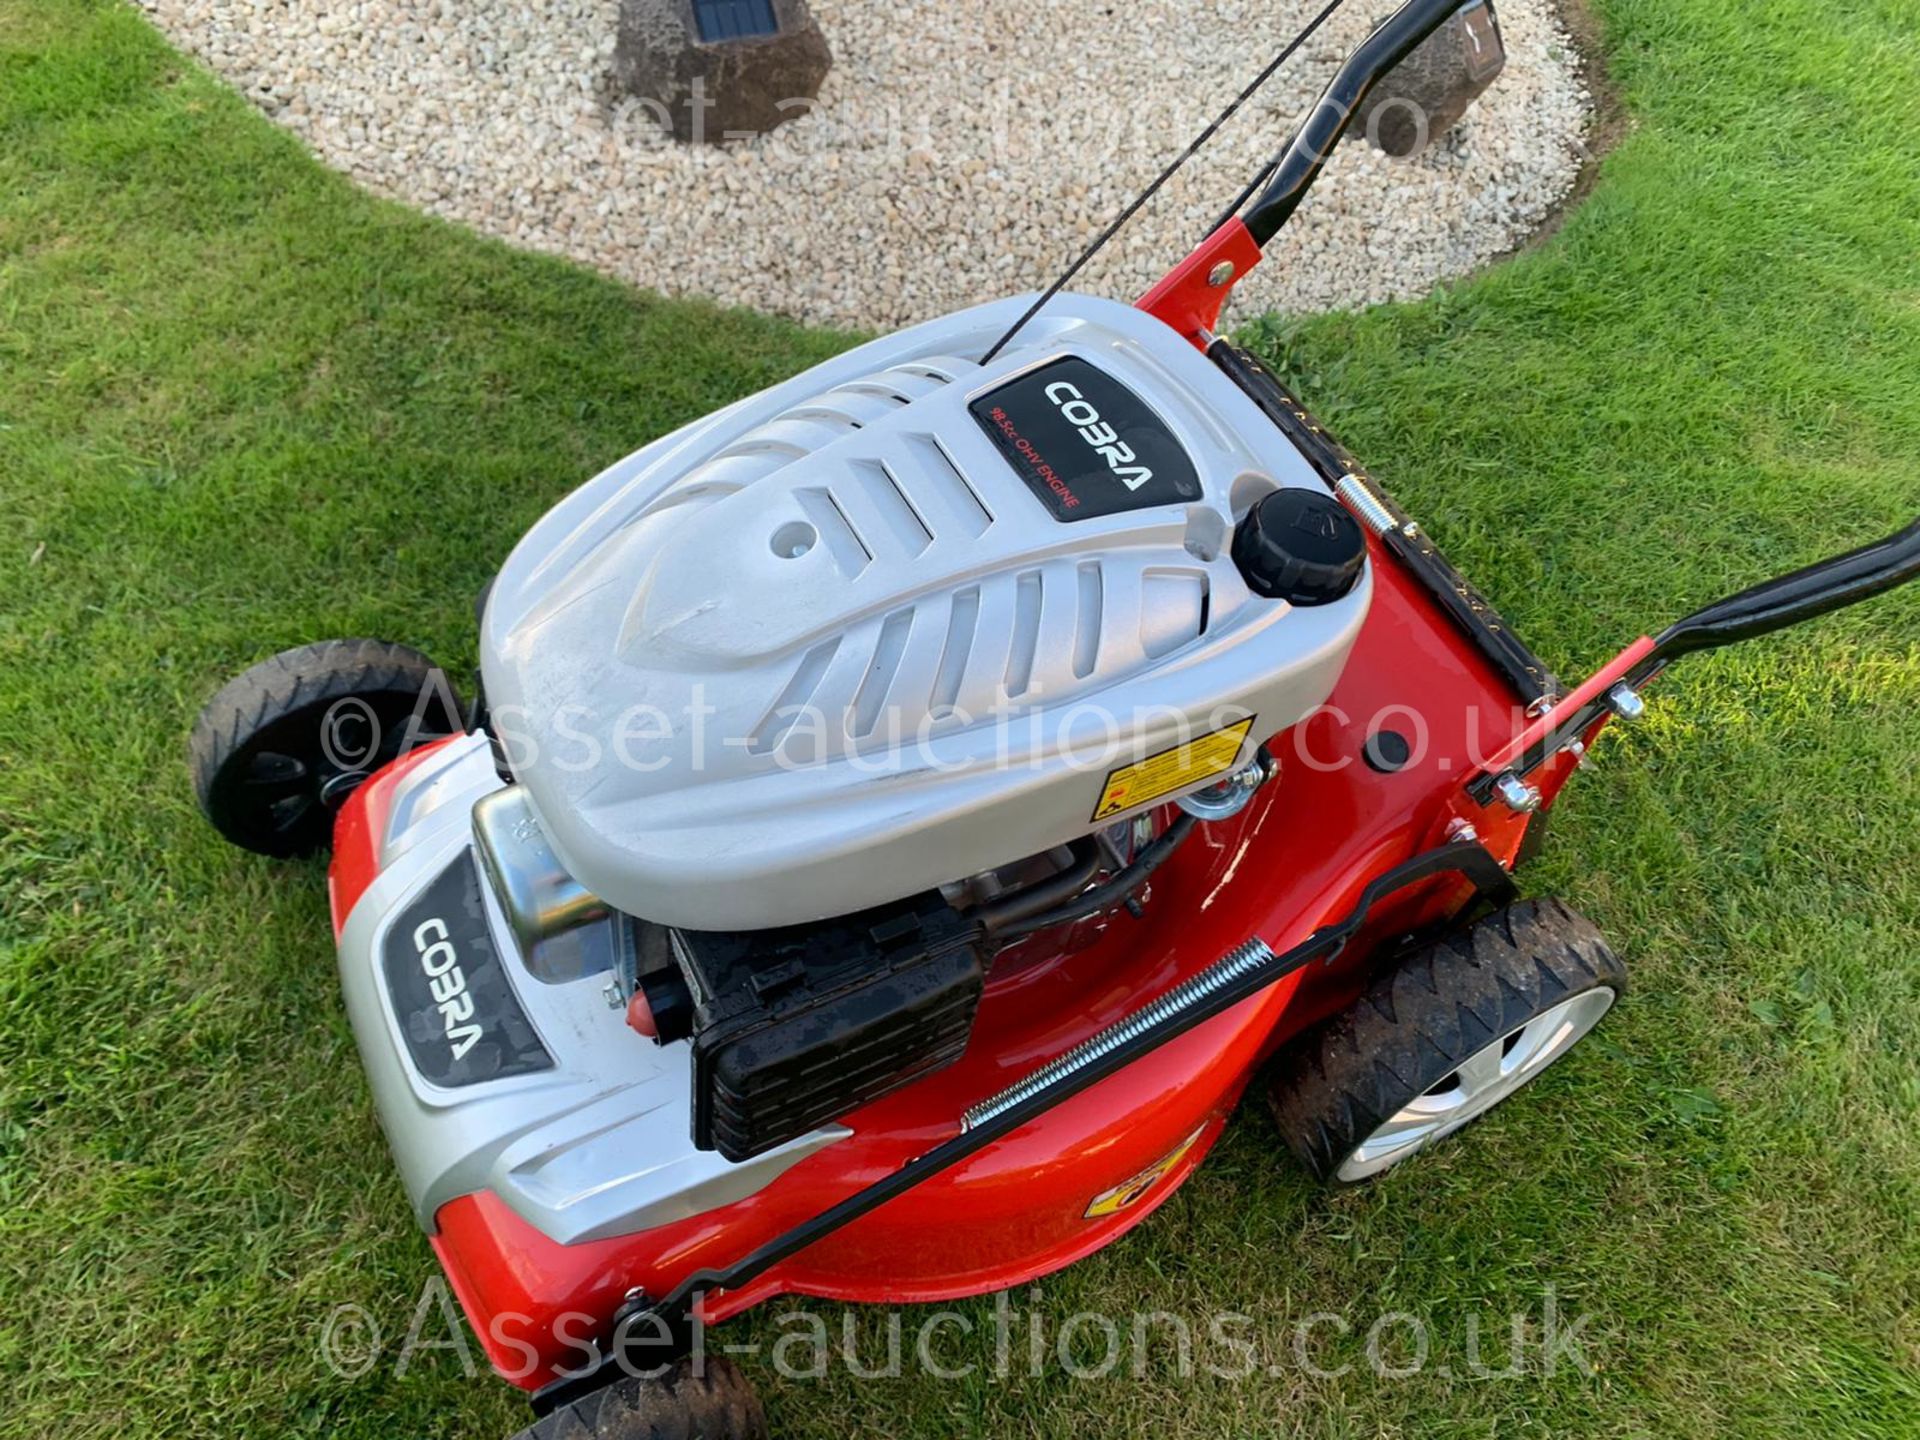 2016 COBRA M40C LAWN MOWER, RUNS AND WORKS WELL, ONLY USED A FEW TIMES, PULL START *NO VAT* - Image 13 of 18